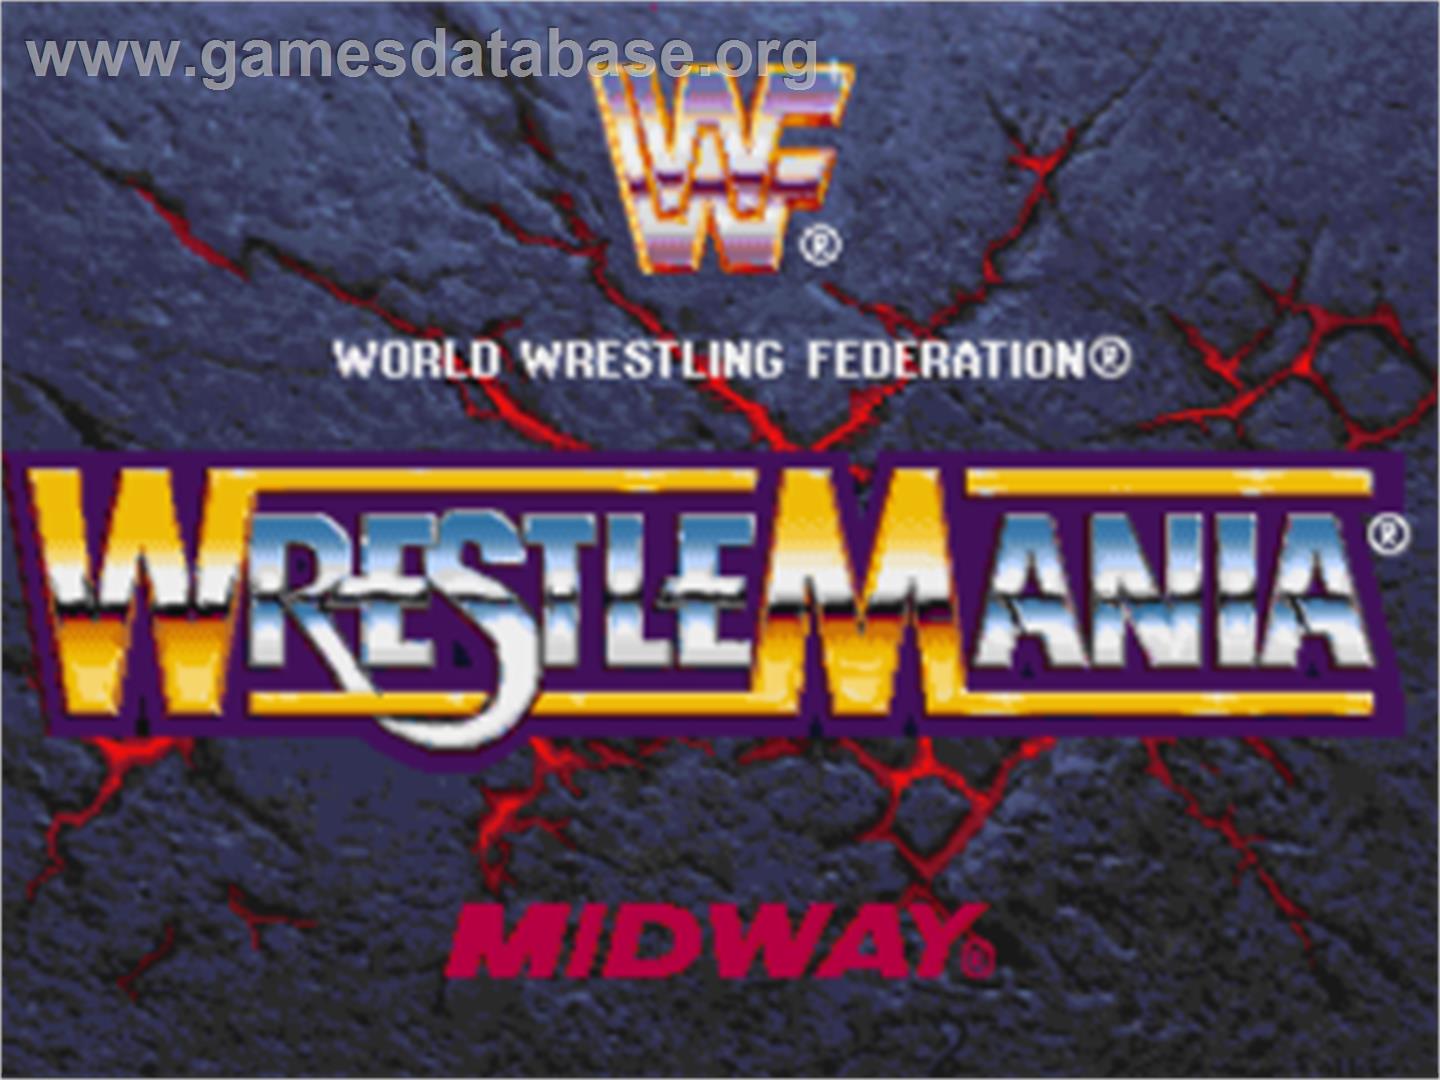 WWF WrestleMania: The Arcade Game (Long Box) - PlayStation 1 (PS1) Game